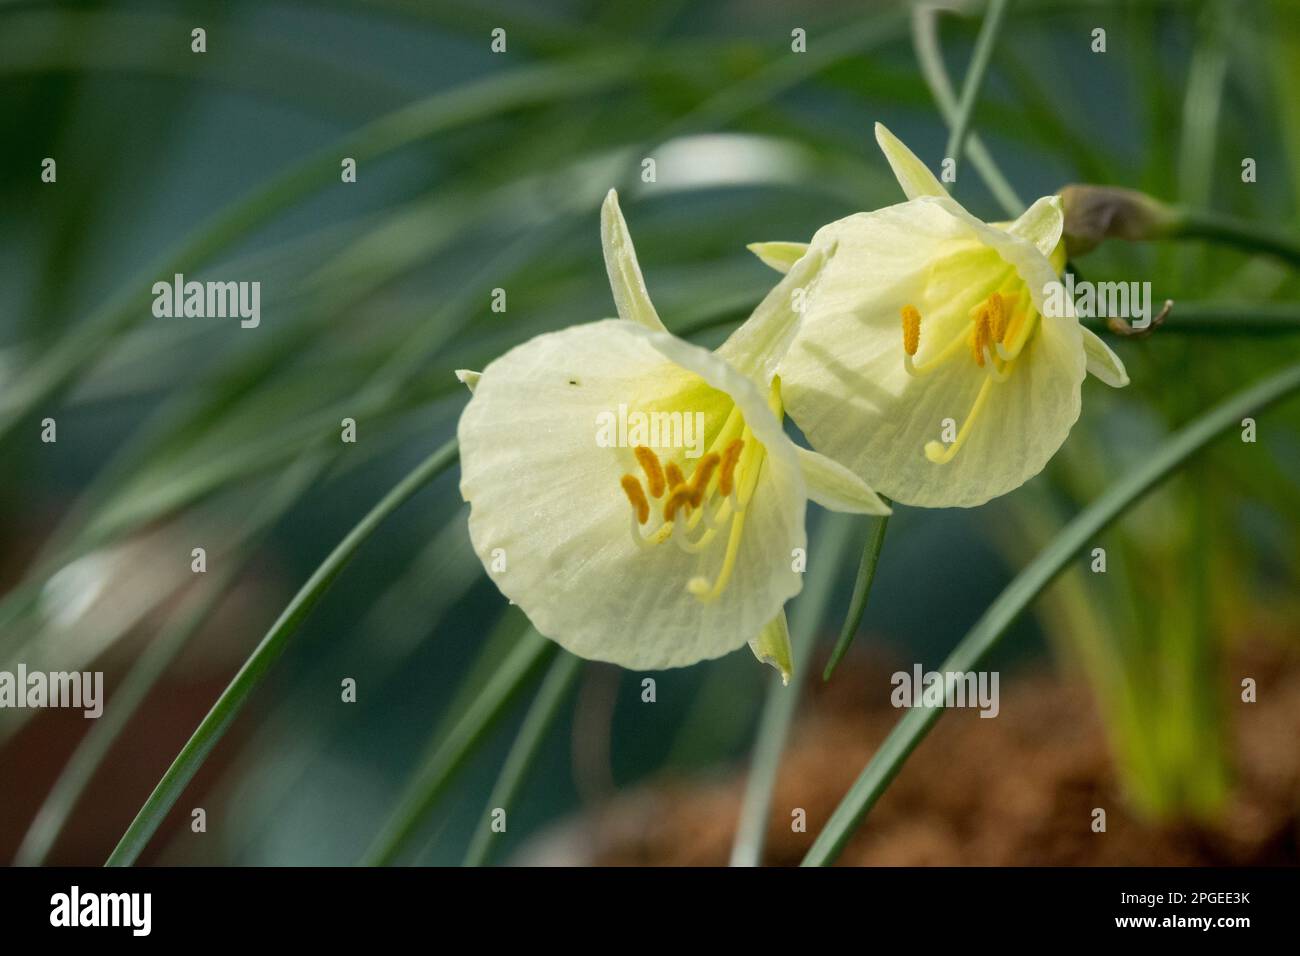 Pale, Yellow, White, Narcissus, Bloom, Daffodil, Narcissus 'Arctic Bells', Dwarf, Daffodils, Flower Stock Photo